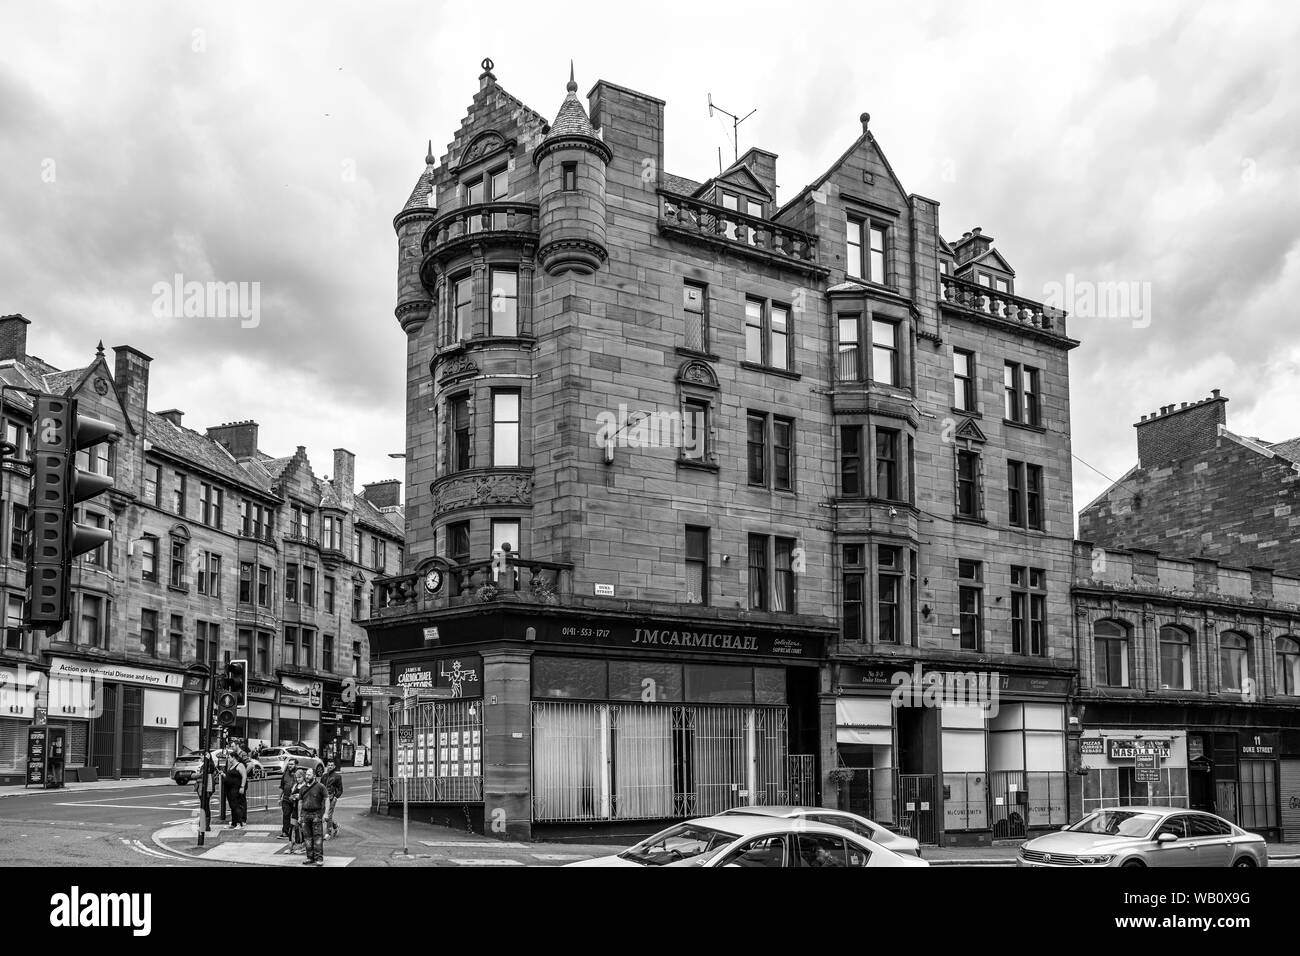 Glasgow, Scotland, UK - June 22, 2019: Impressive architecture of old Glasgow at 1 Duke Street Glasgow now occupied by Glasgow Solicitors. Stock Photo